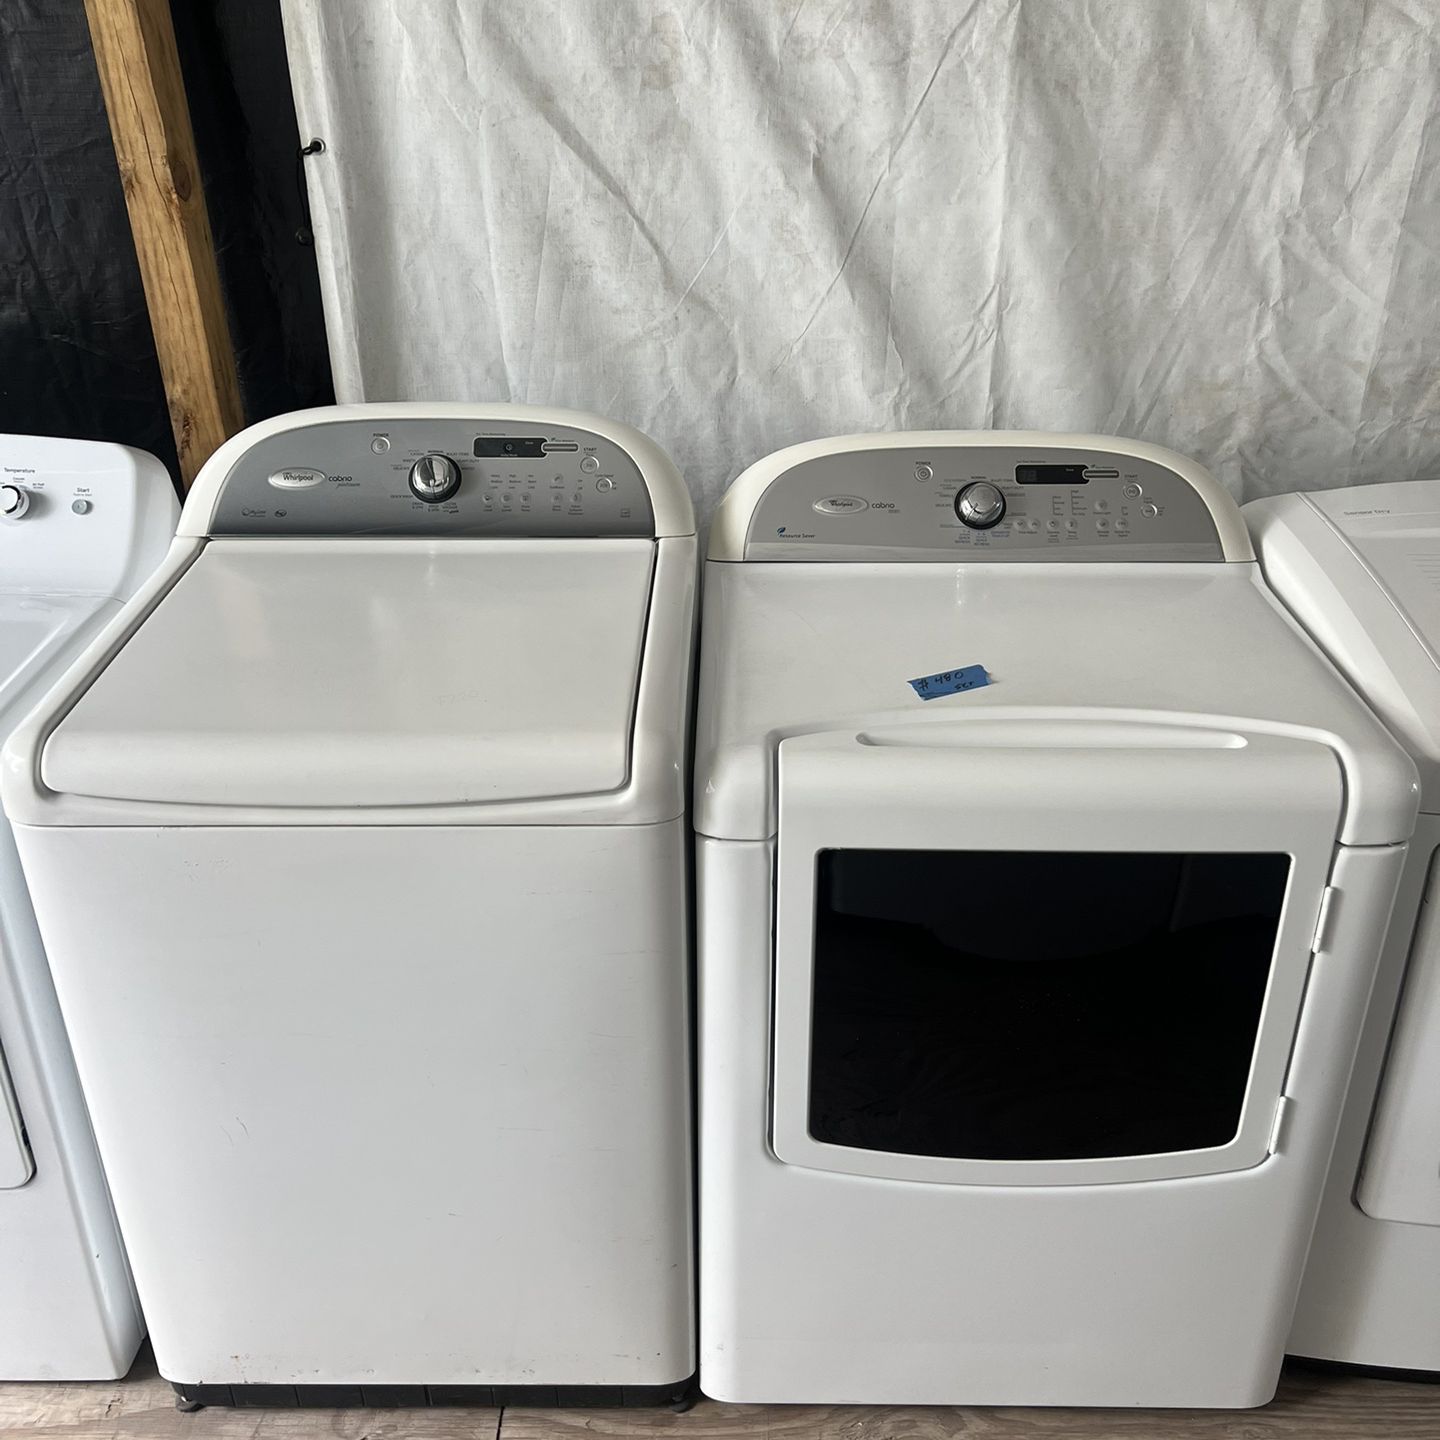 Whirlpool Washer&dryer Large Capacity Set    60 day warranty/ Located at:📍5415 Carmack Rd Tampa Fl 33610📍